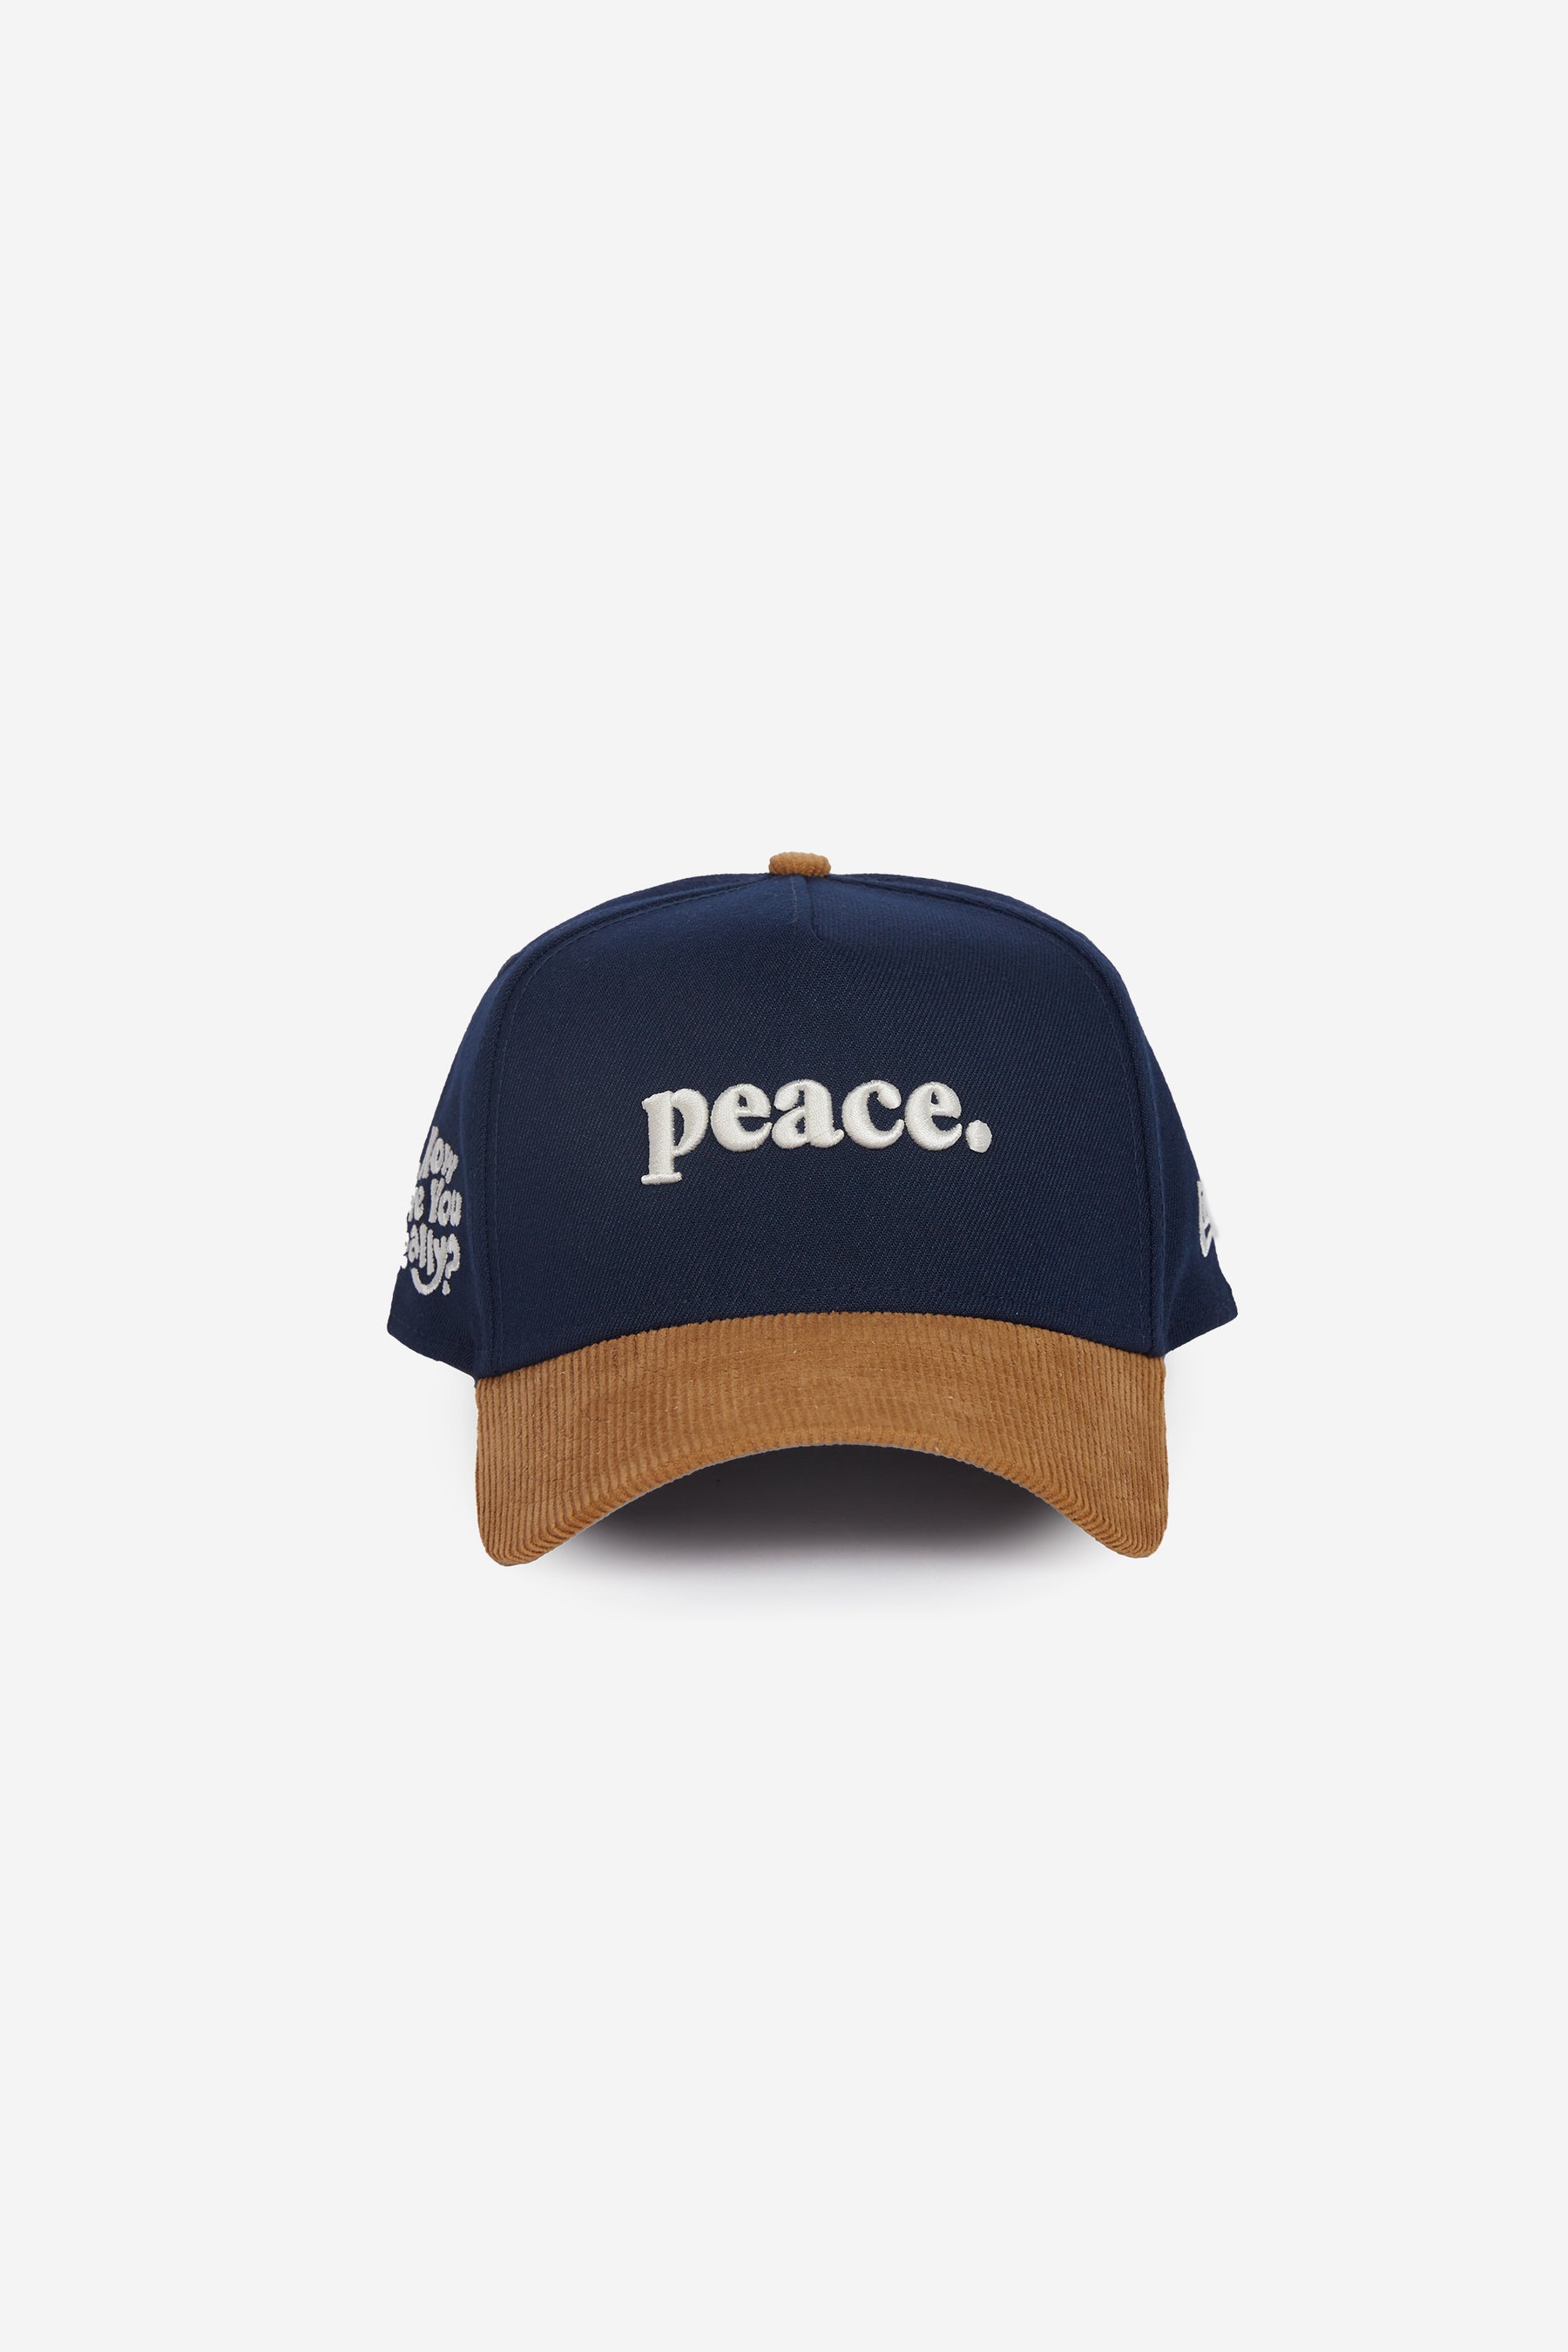 Peace How Are You Really 9FORTY A-Frame Cap - Oceanside/Wheat